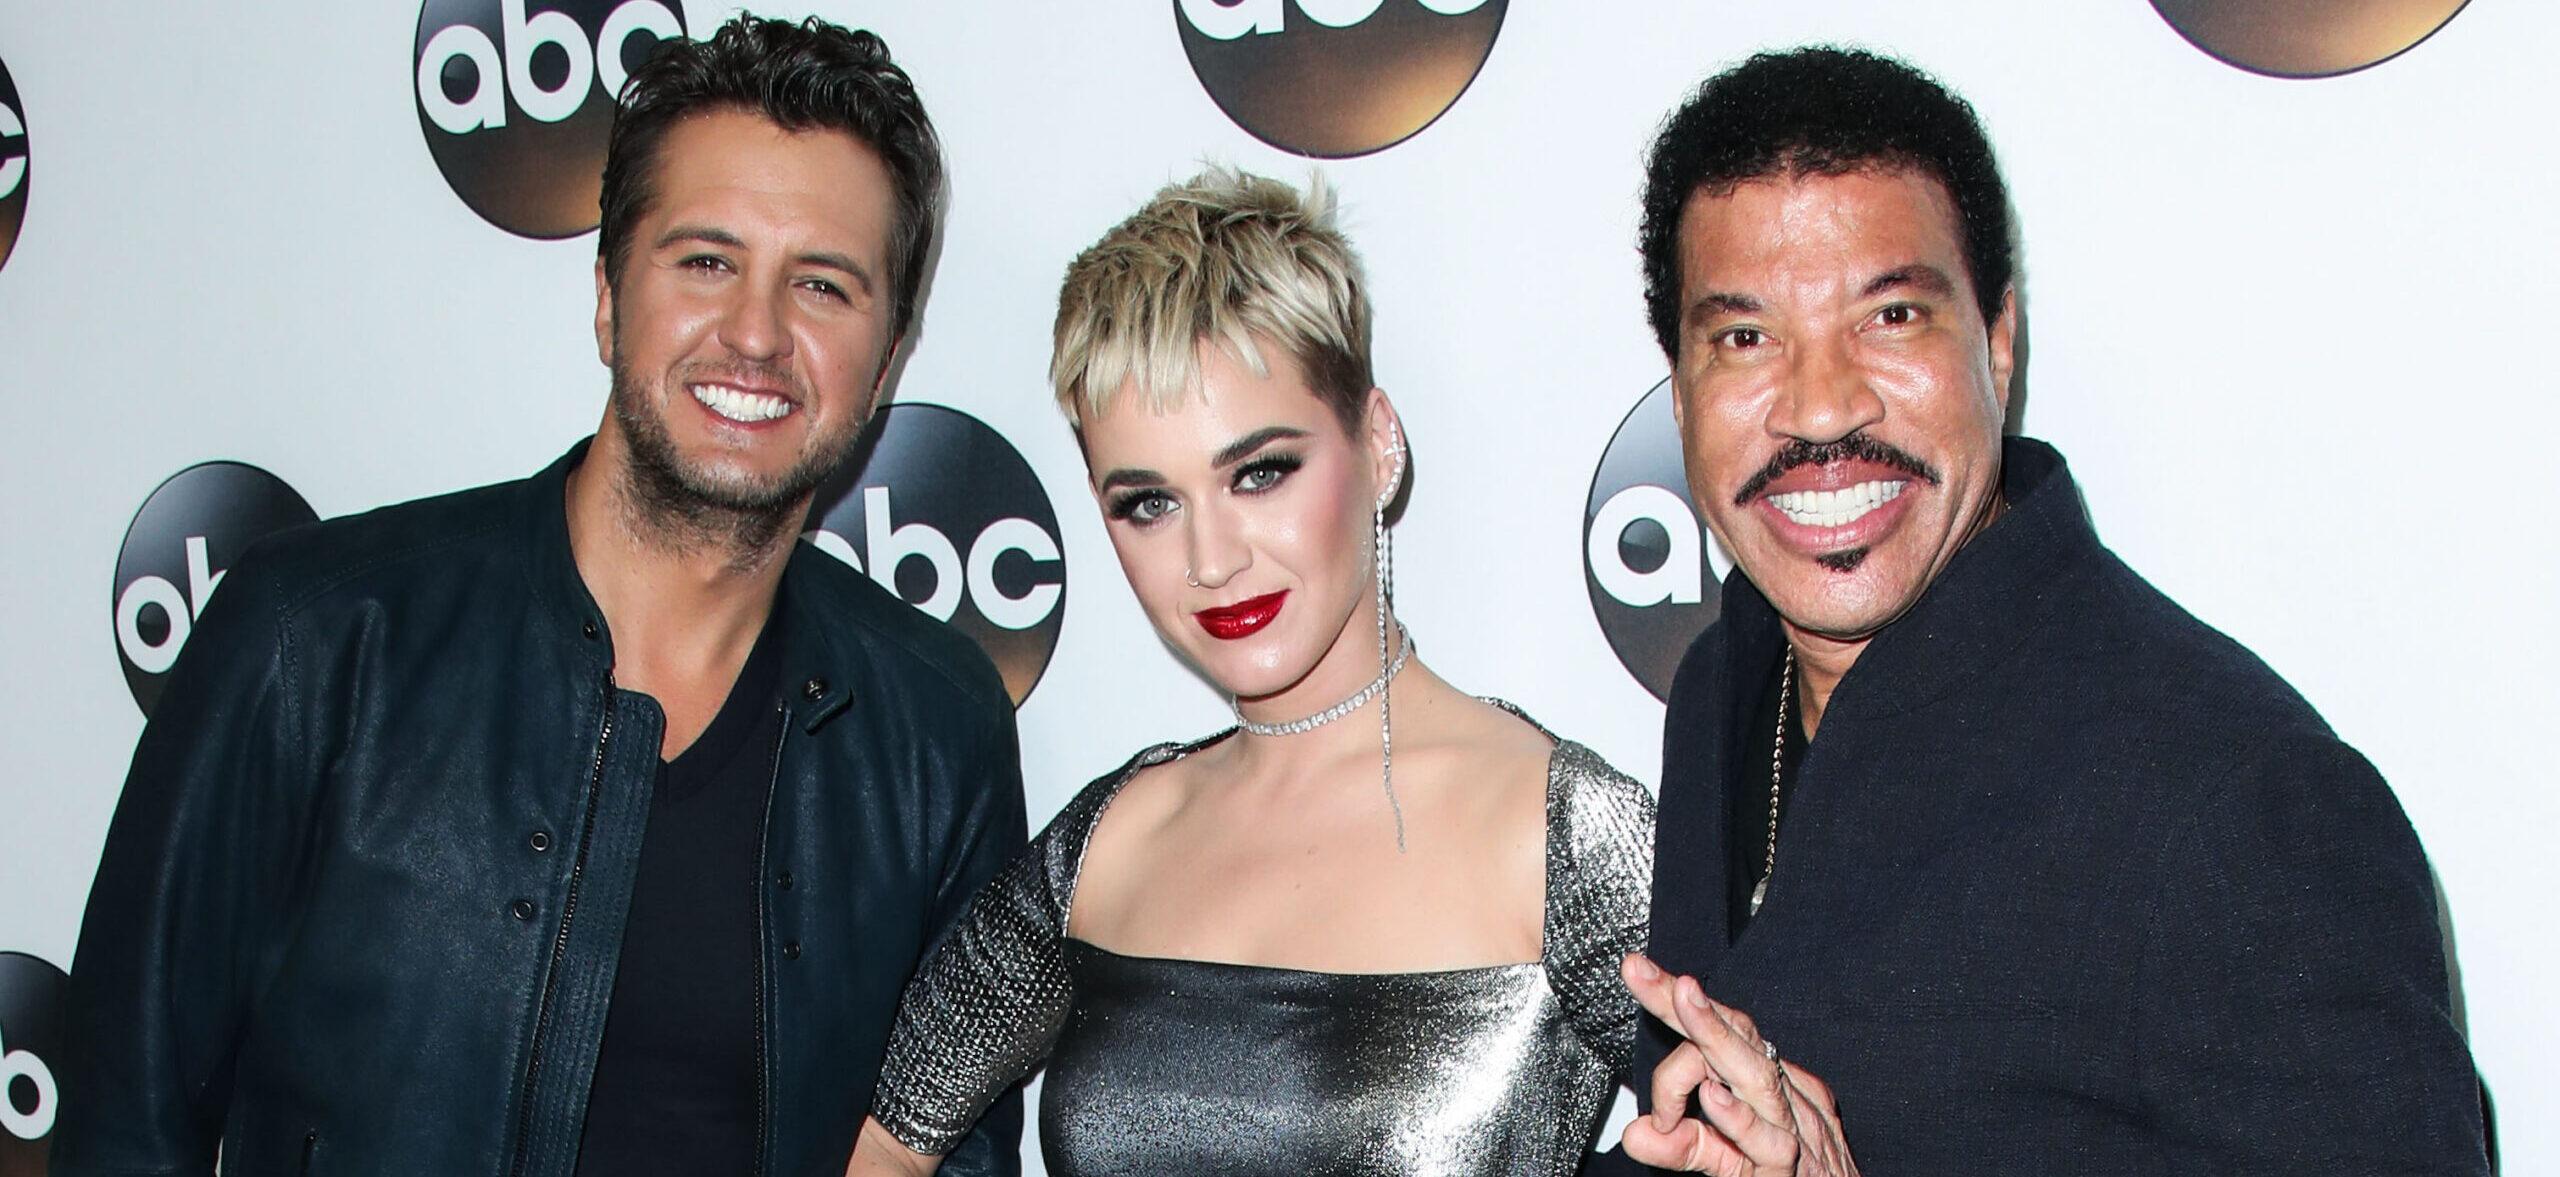 Luke Bryan Stands Up For Katy Perry Over 'American Idol' Backlash